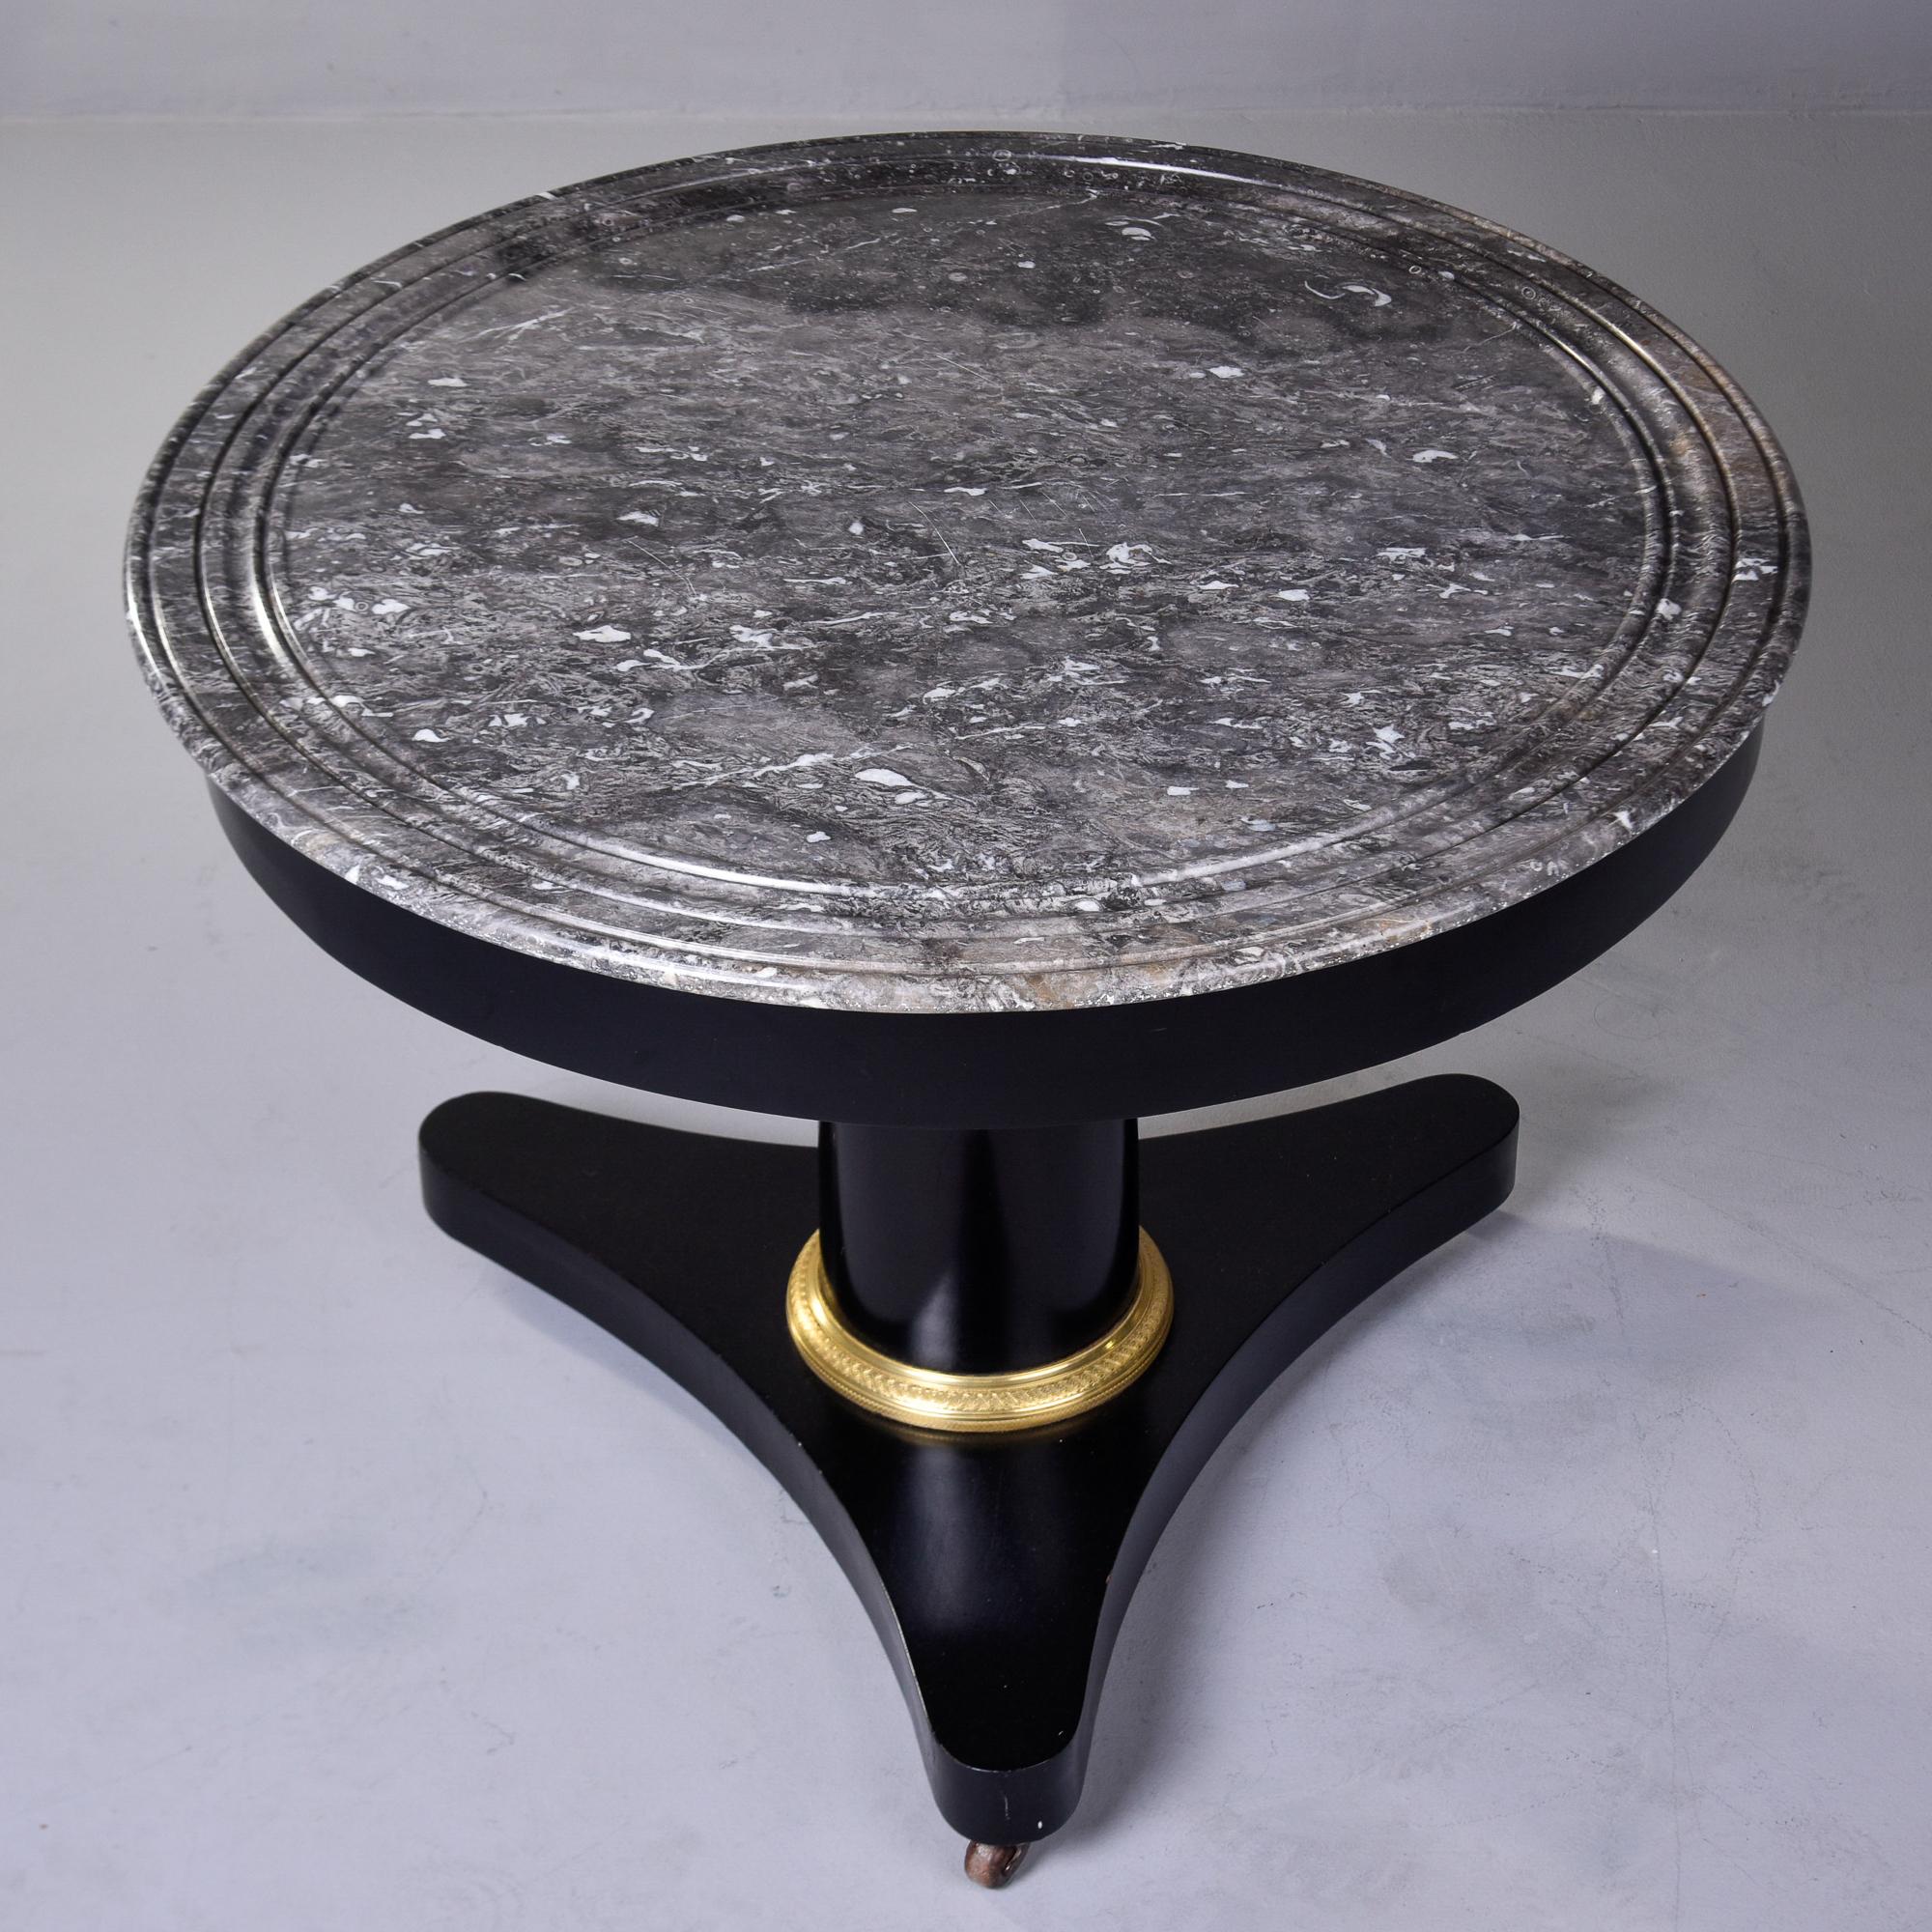 Found in France, this circa 1840s mahogany empire center table has a new, professionally applied ebonised finish. Gray and white streaked round marble top with a brass trimmed trefoil base on casters. Unknown maker.

Very good overall antique